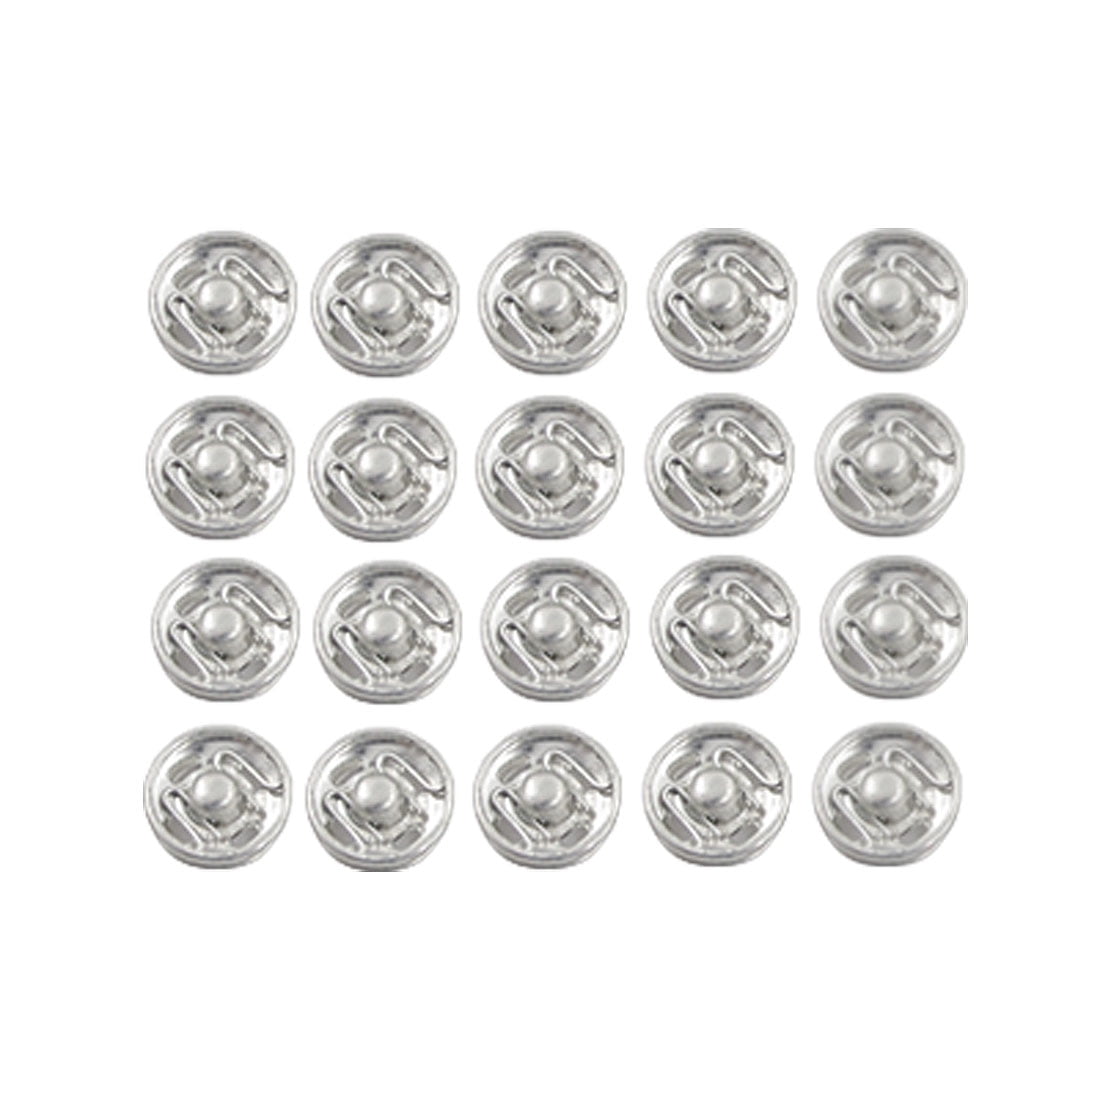 Silver Buttons - buy online »